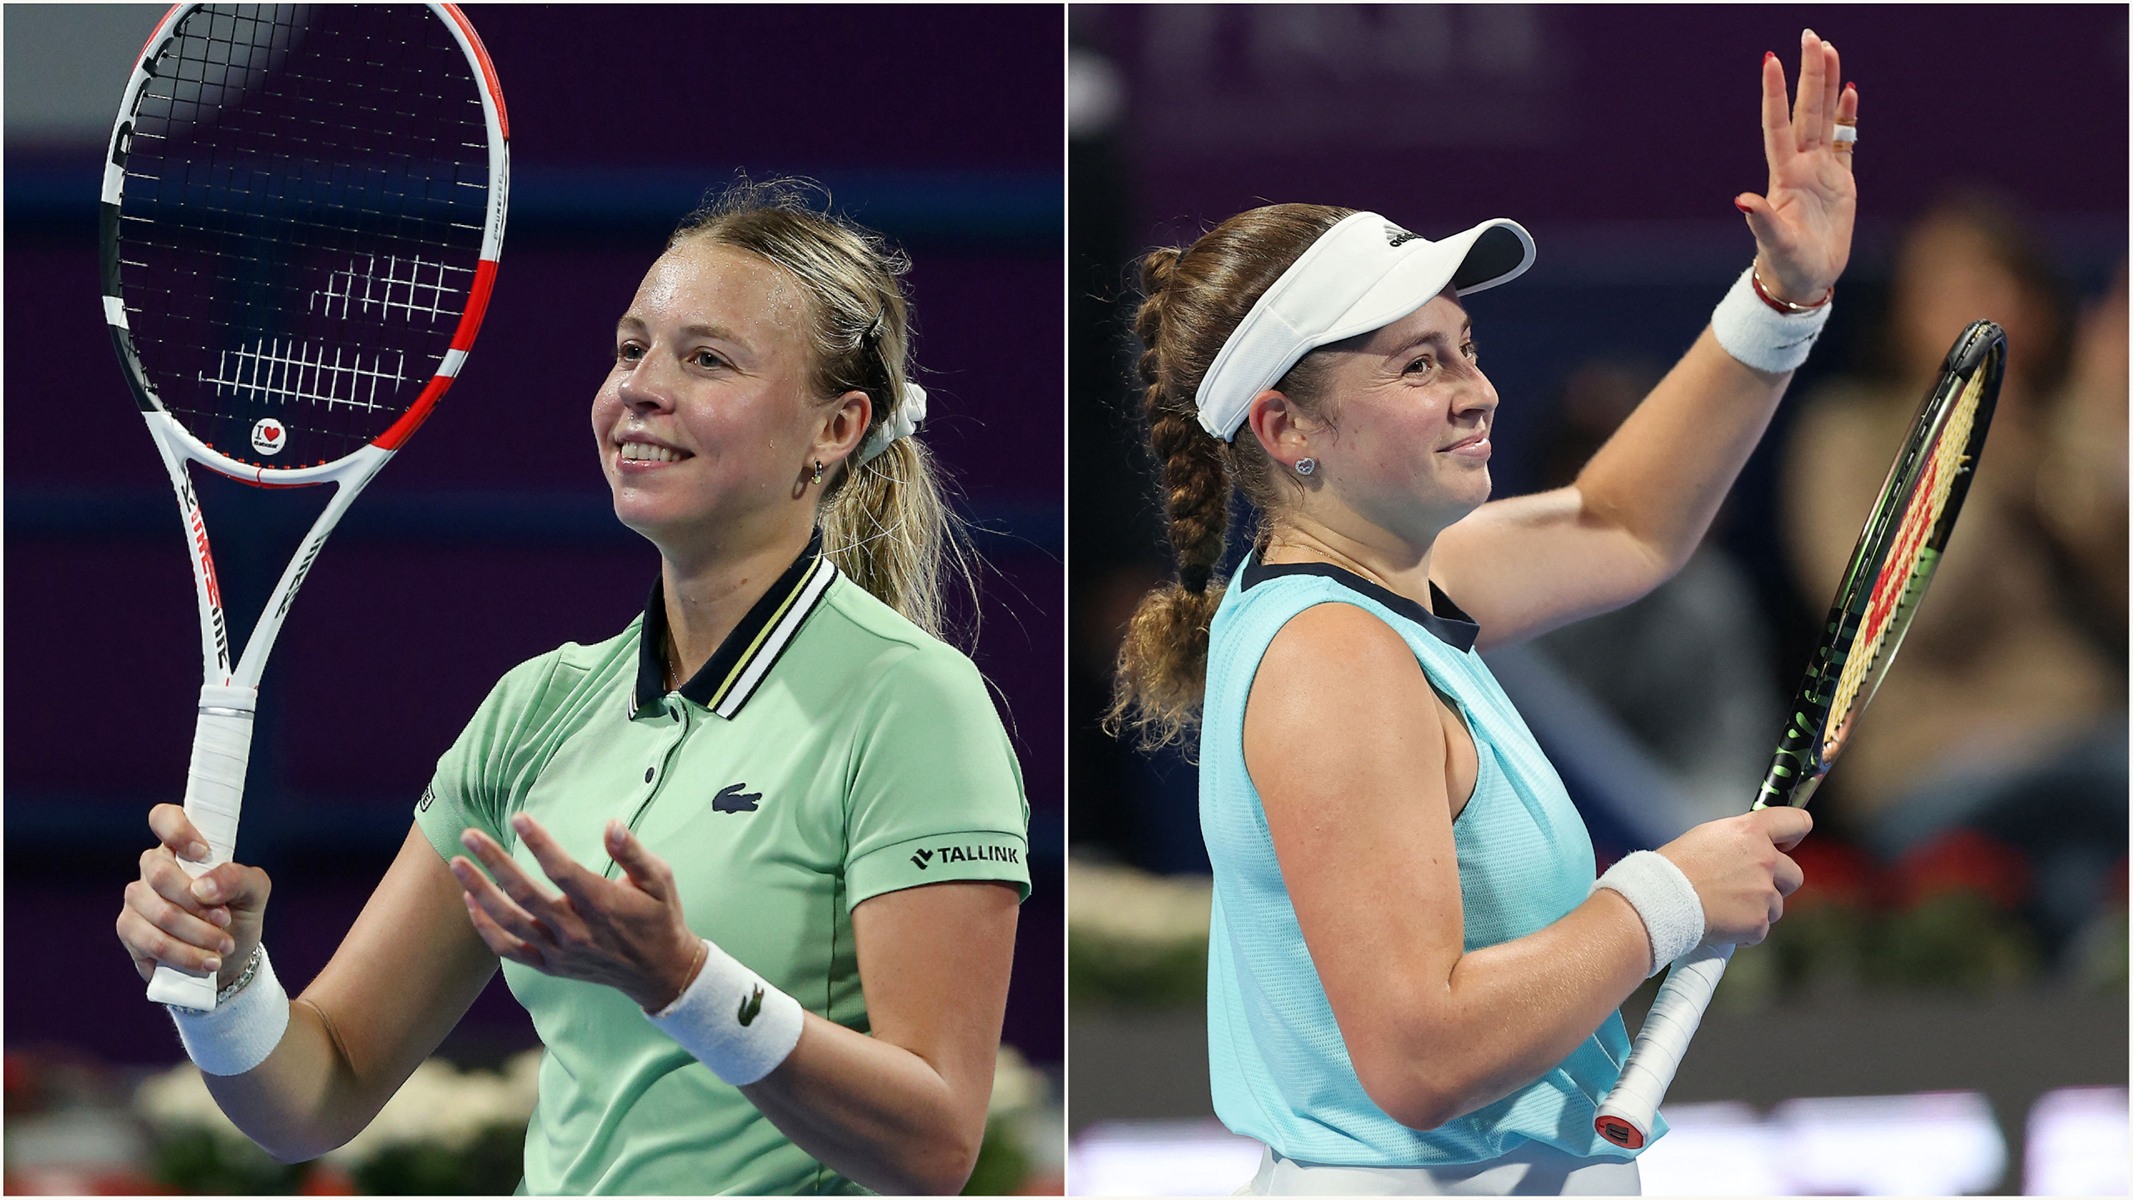 Two streaks collide as Kontaveit, Ostapenko get a rematch in Doha semifinals